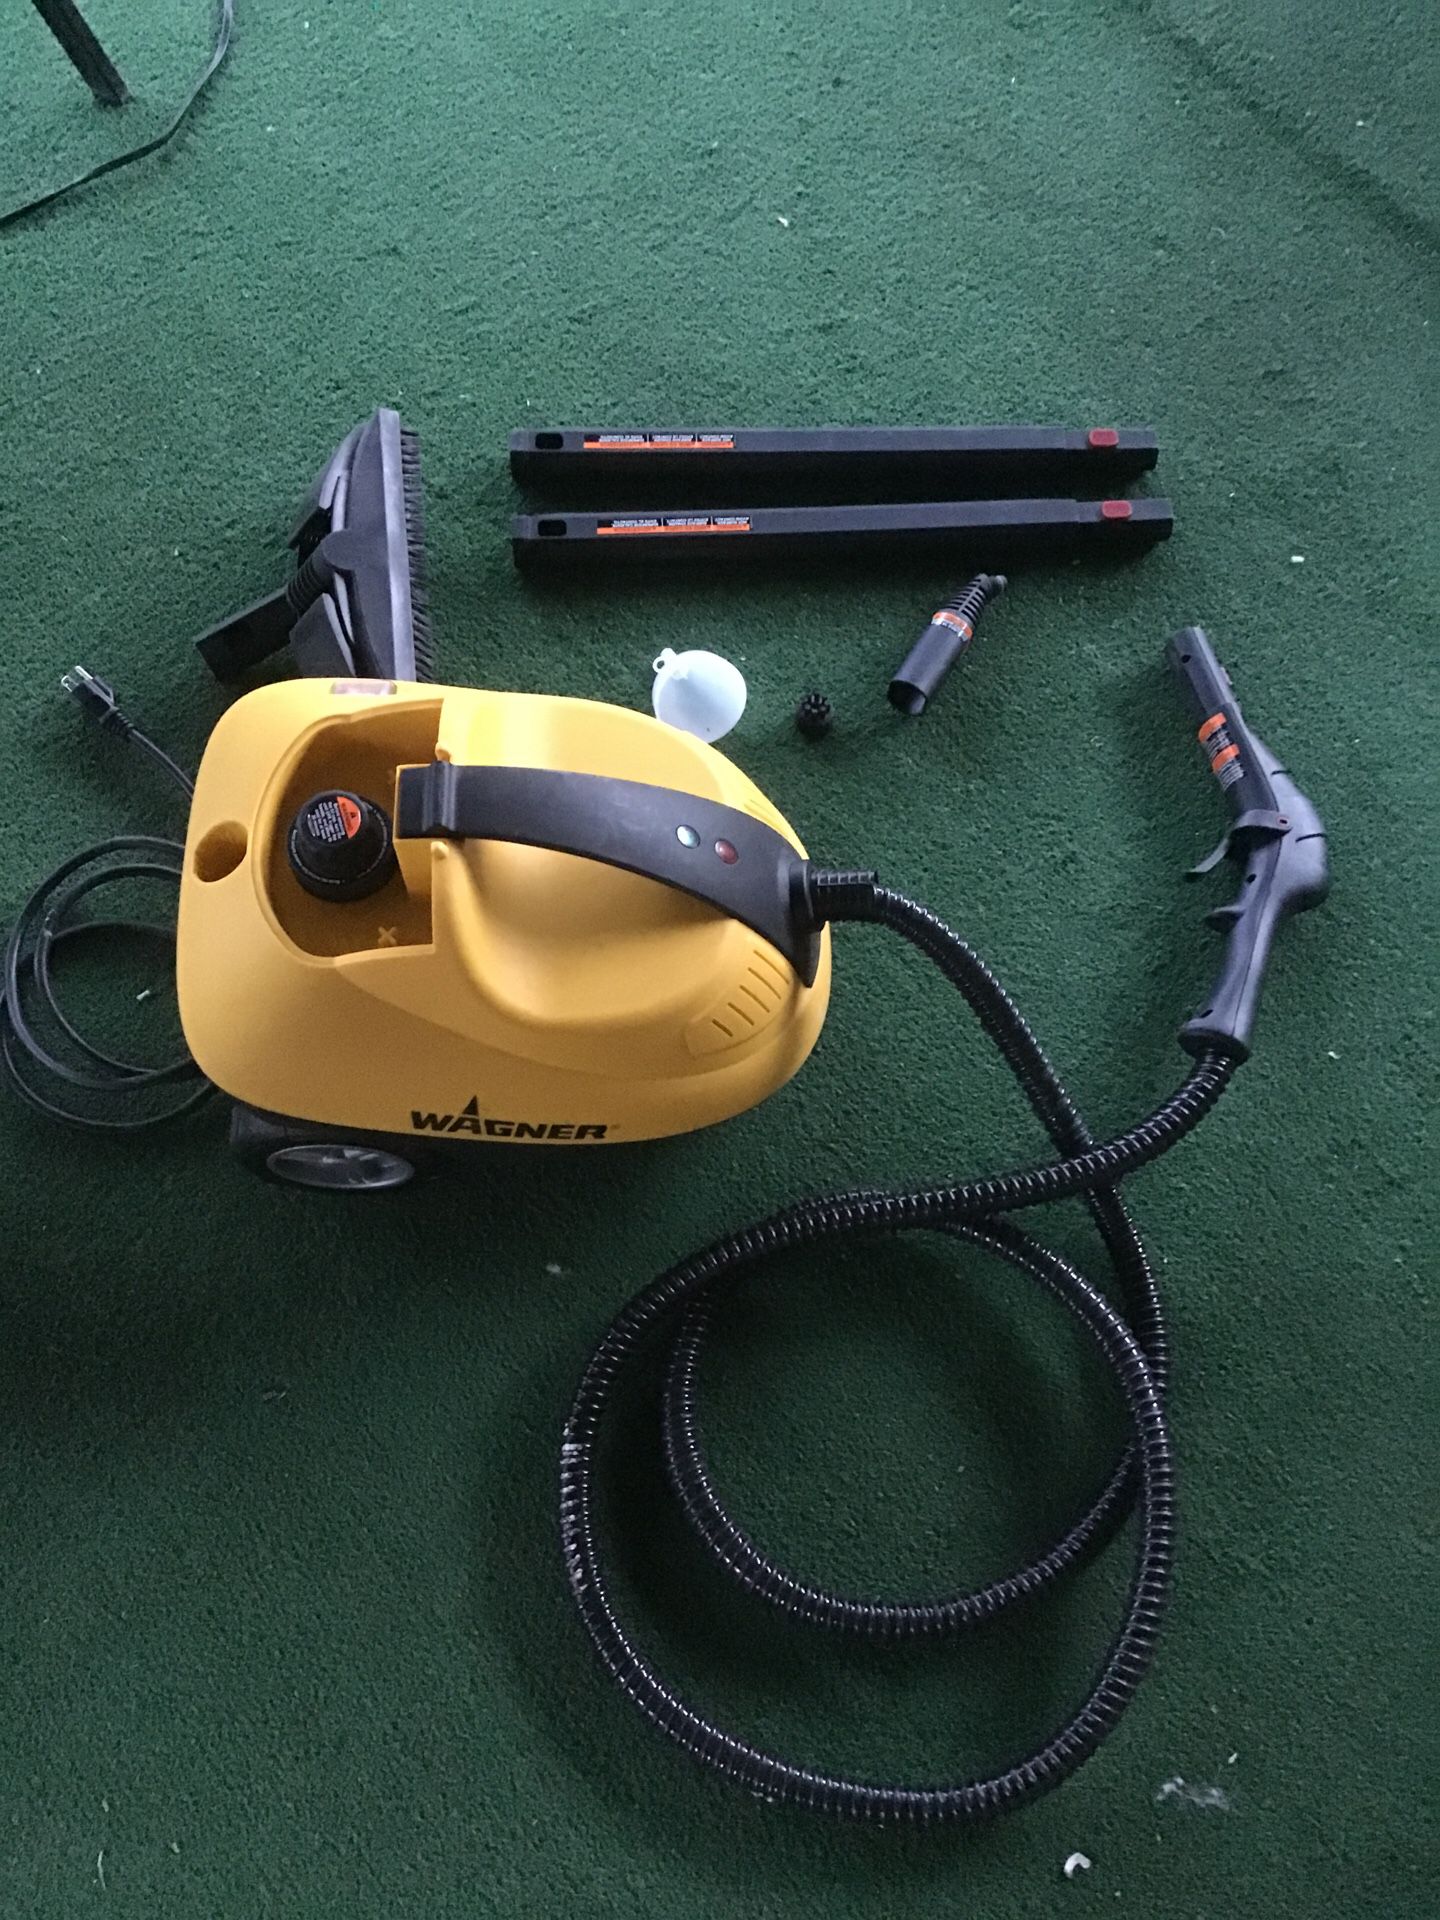 Wagner paint stripper / steam cleaner